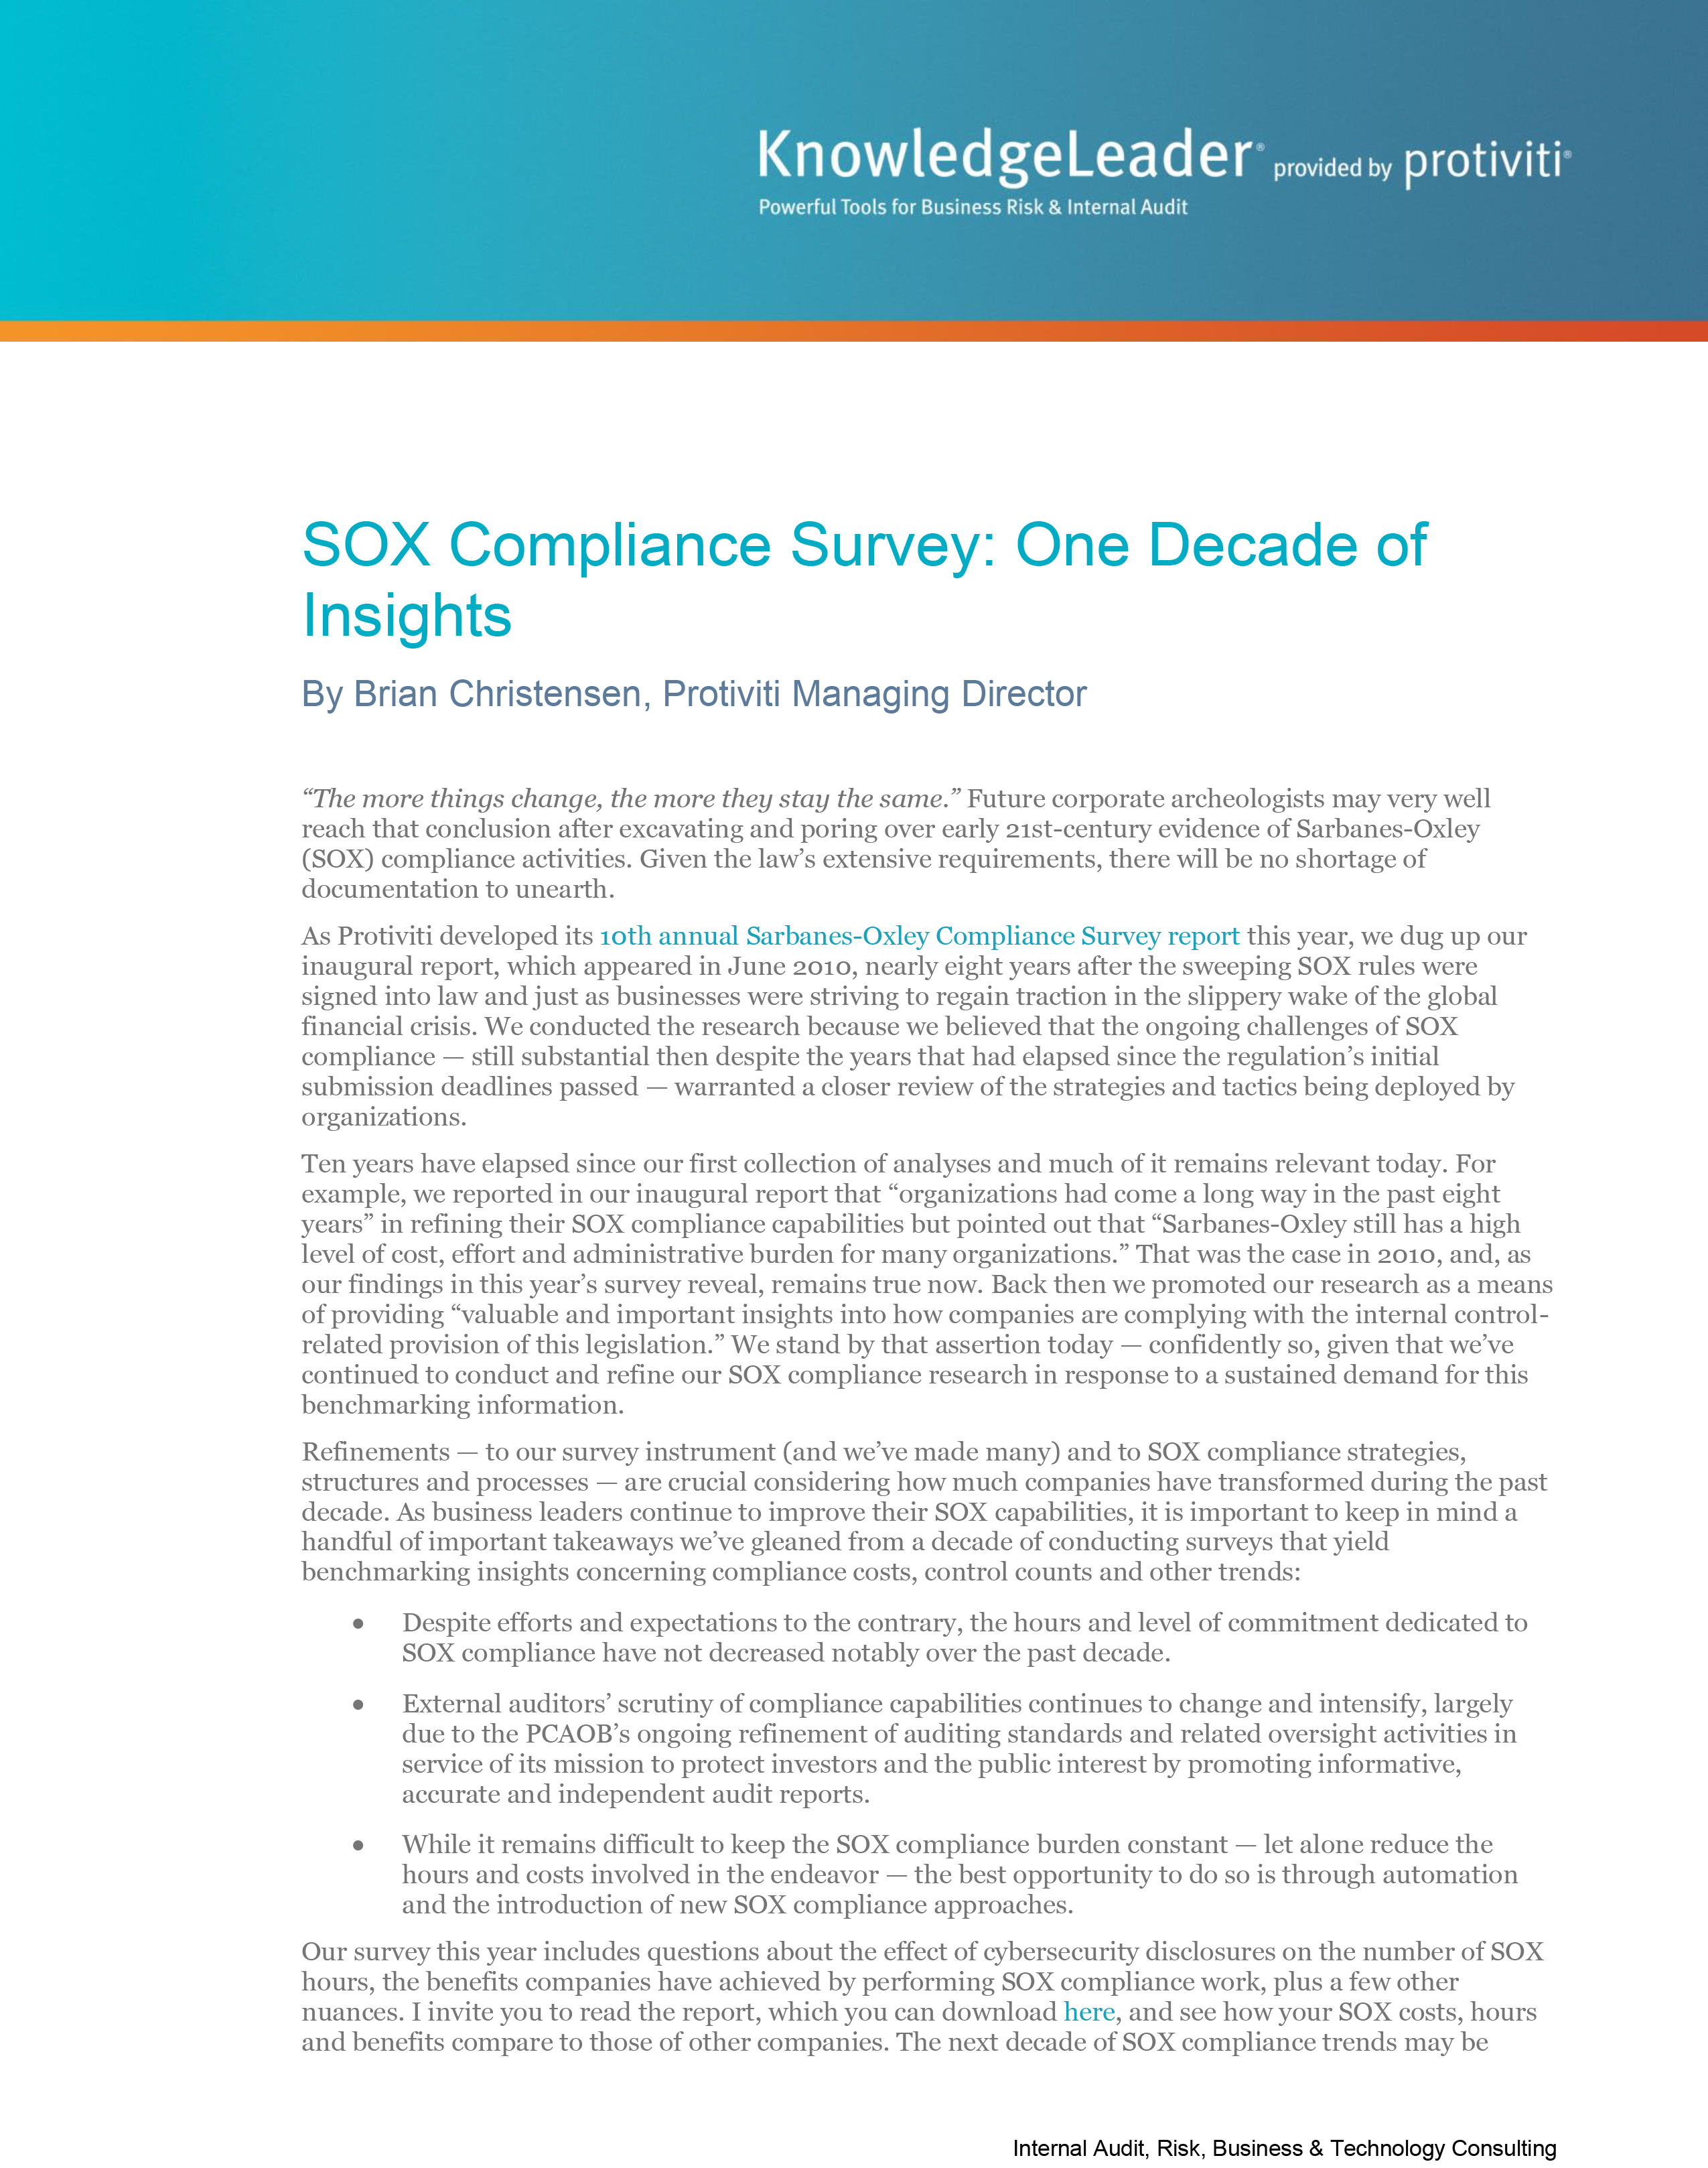 Screenshot of the first page of SOX Compliance Survey One Decade of Insights